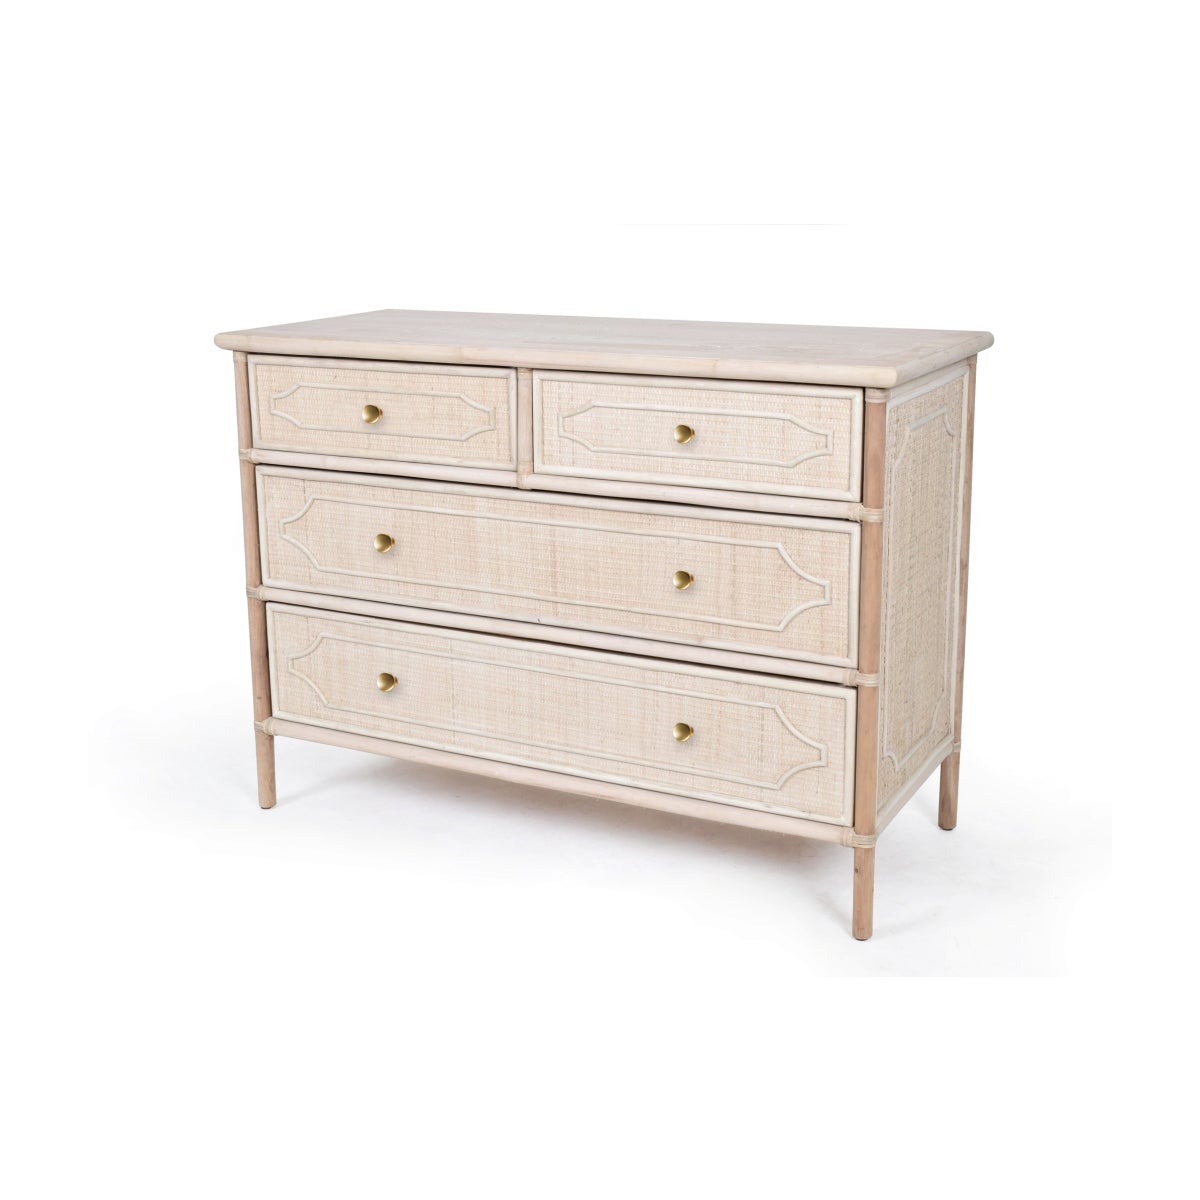 4 Drawer Dresser Unpainted - "Select Your Color"   Frame: Rattan & Wood